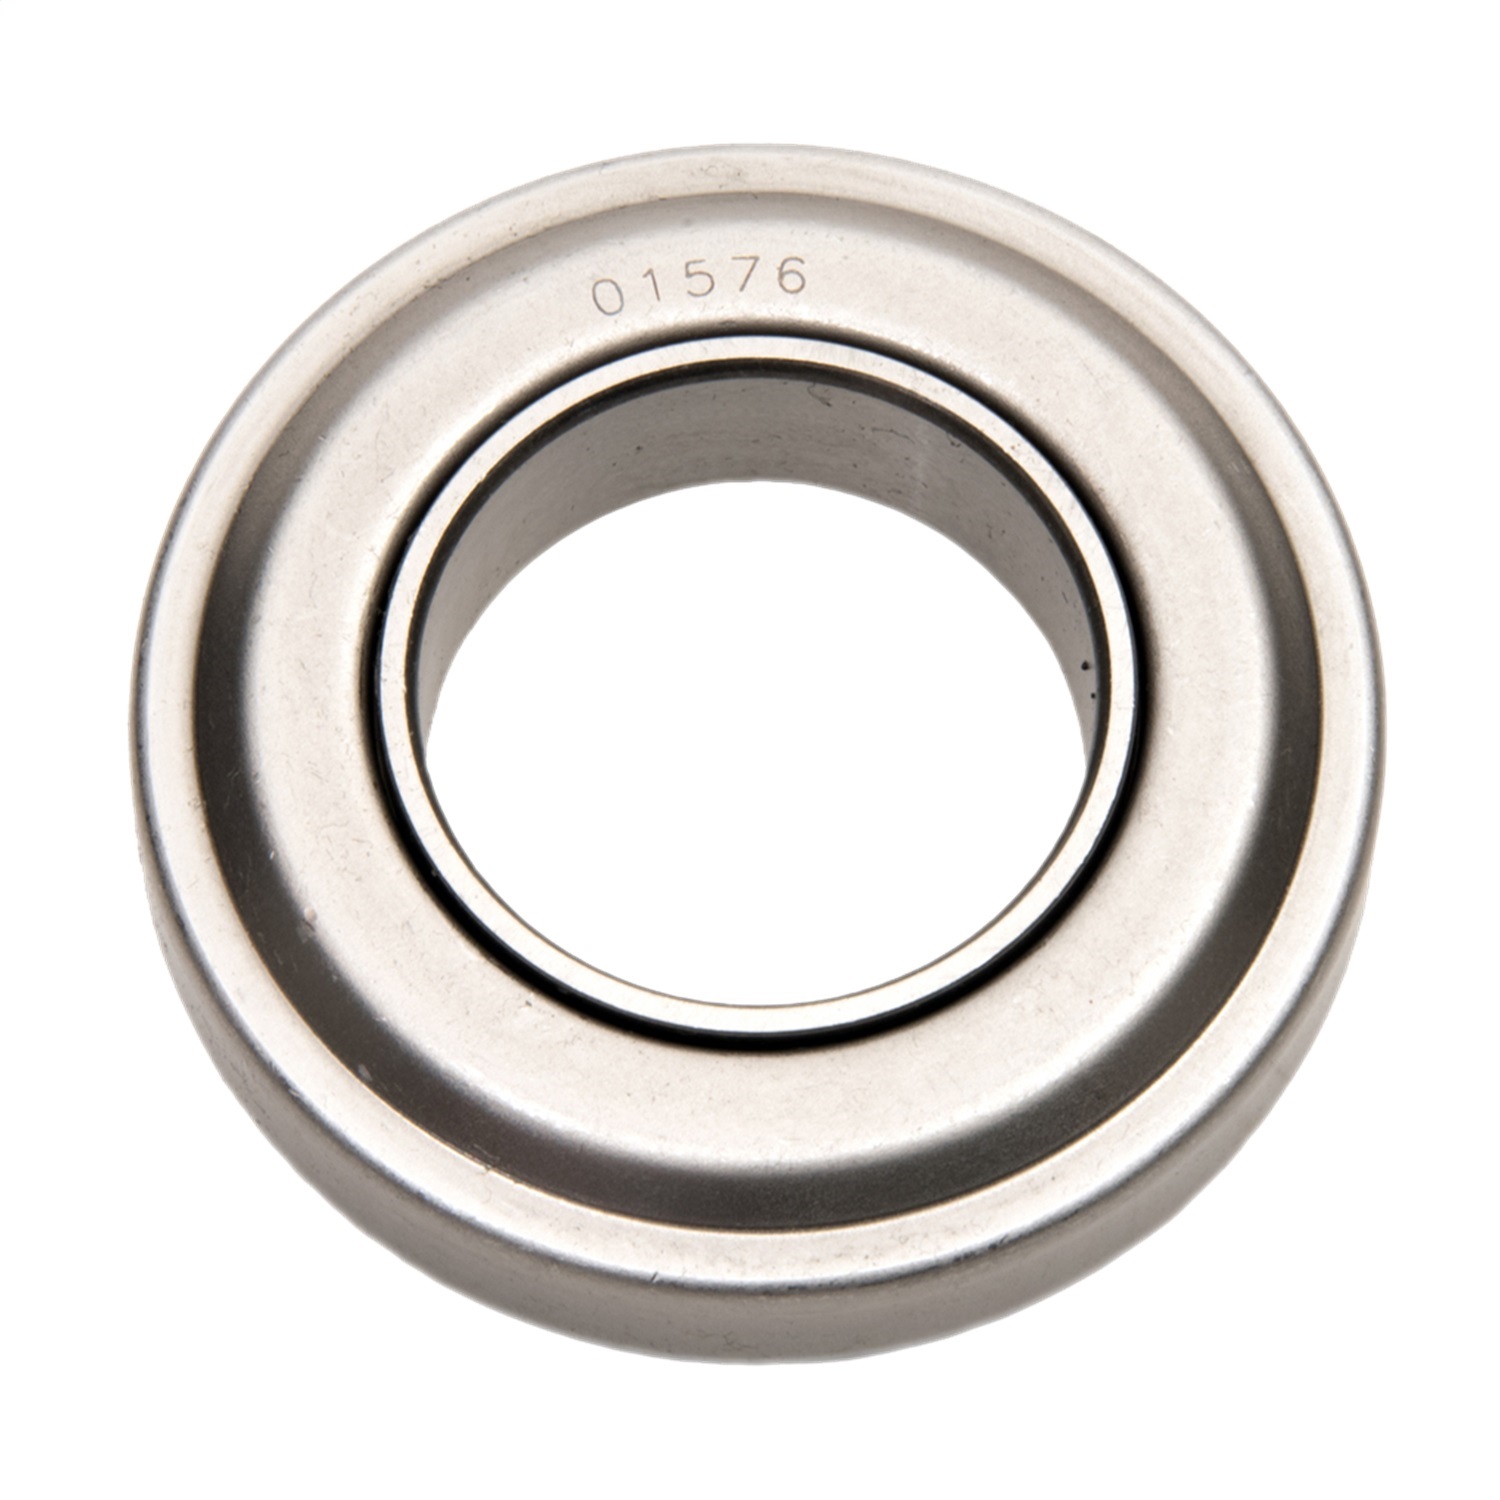 Centerforce Centerforce 016 Throwout Bearing